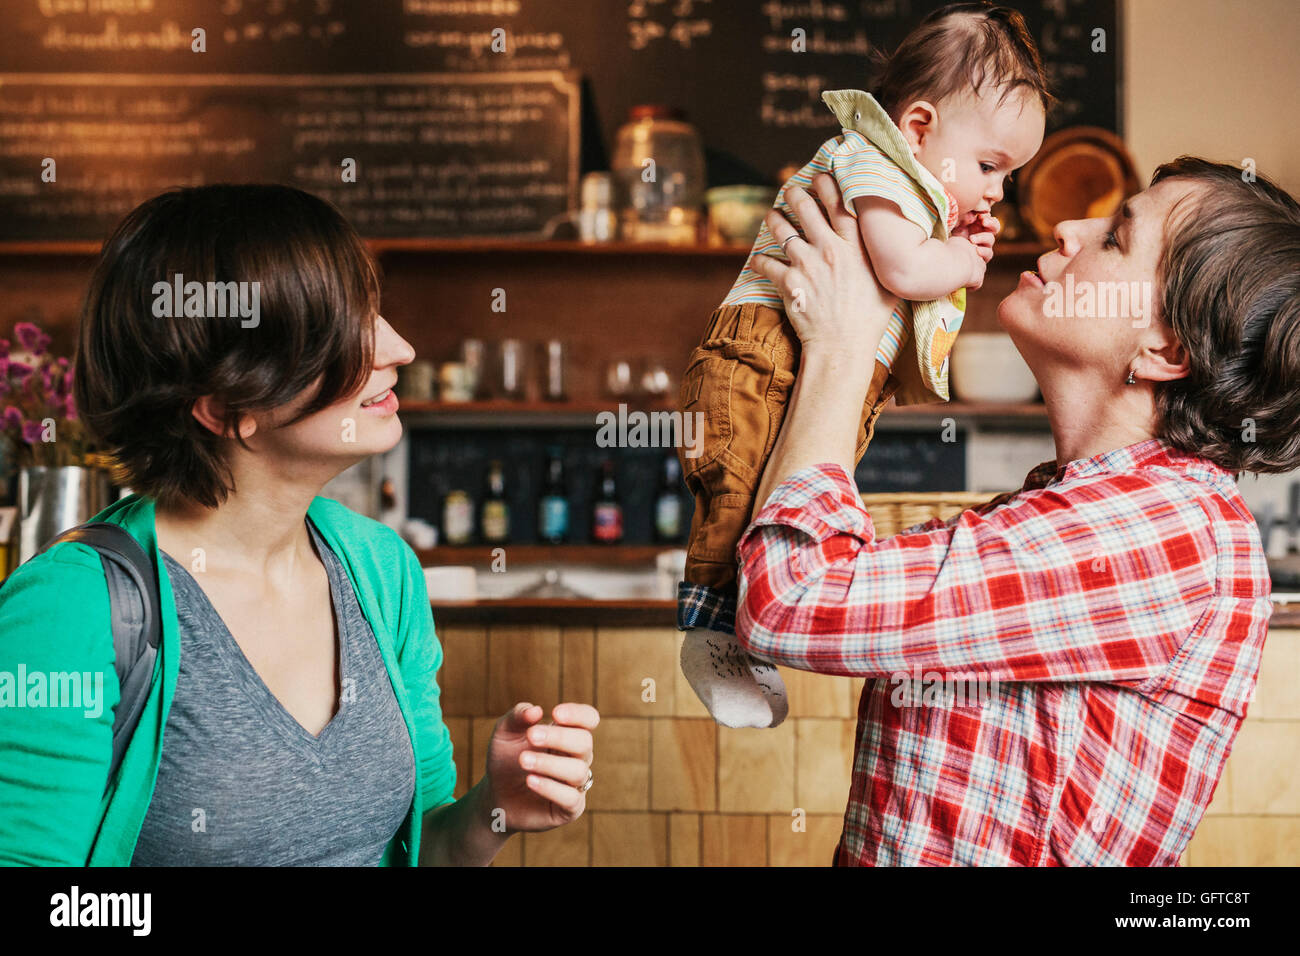 Two women a same sex couple with their 6 month old baby in their coffee shop business owners and parents Stock Photo